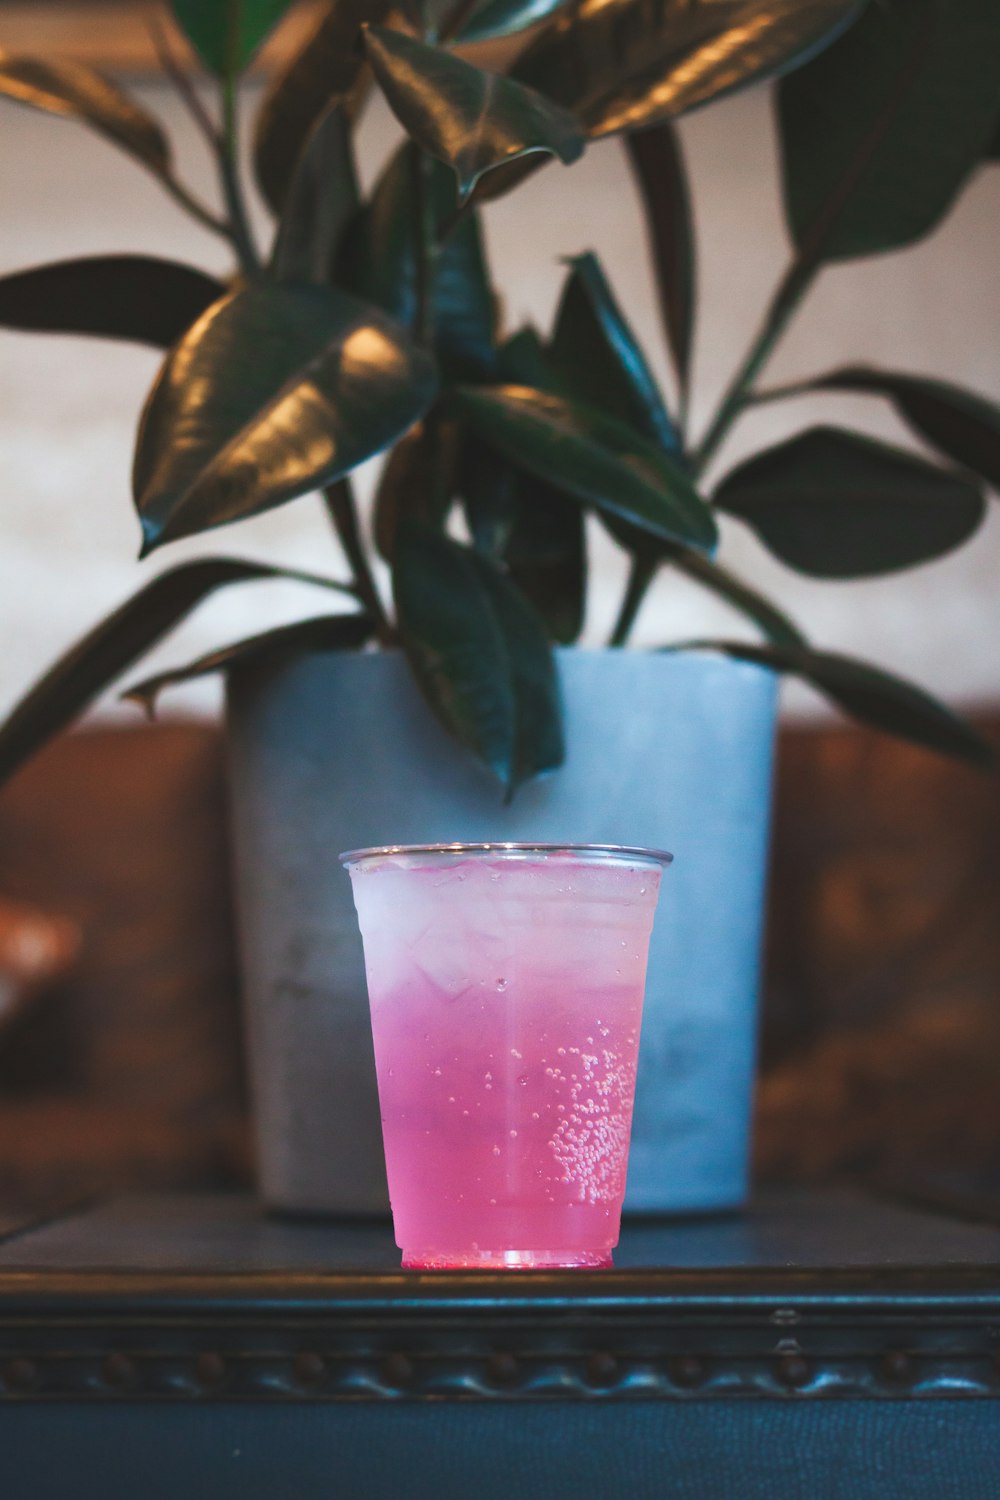 clear glass cup with pink liquid